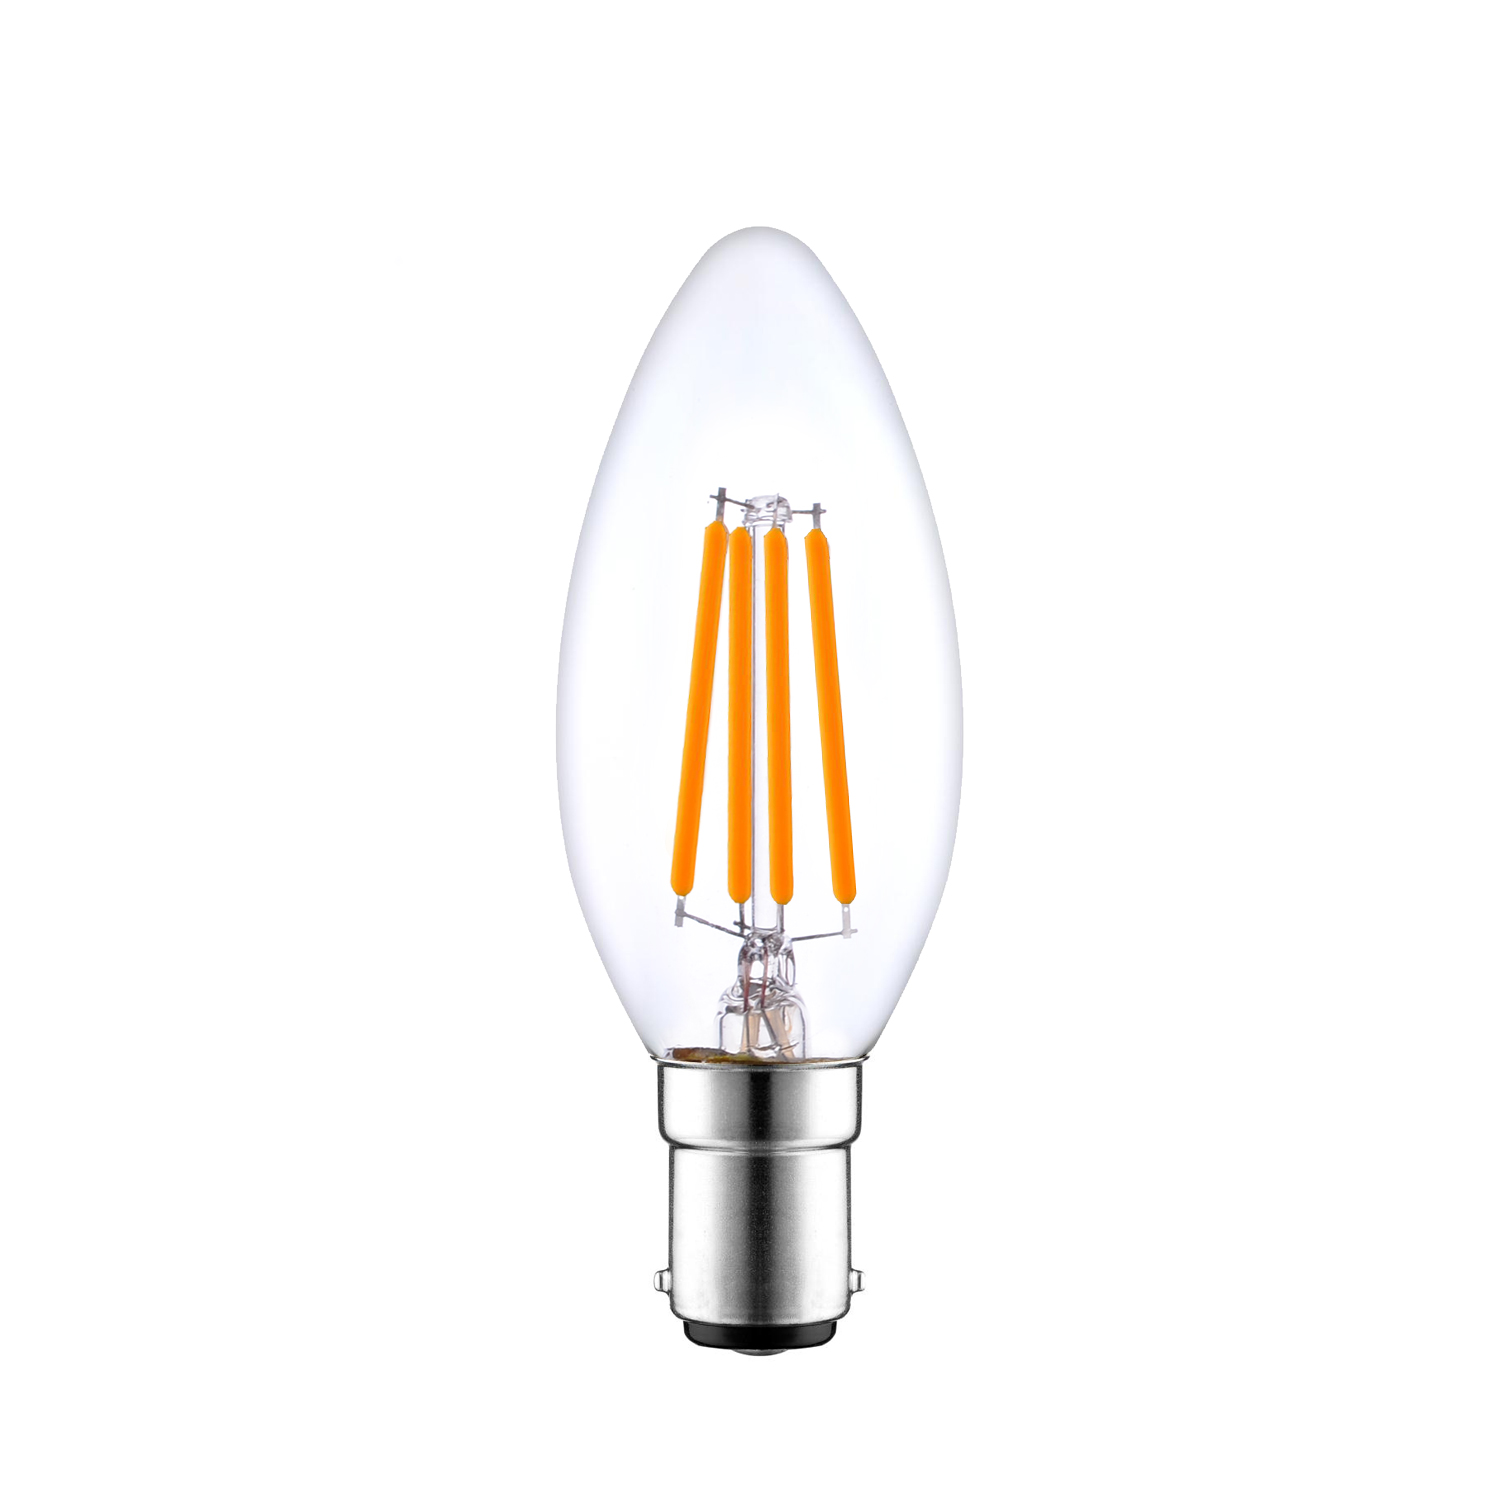 B15 Dimmable LED candle bulb Filament